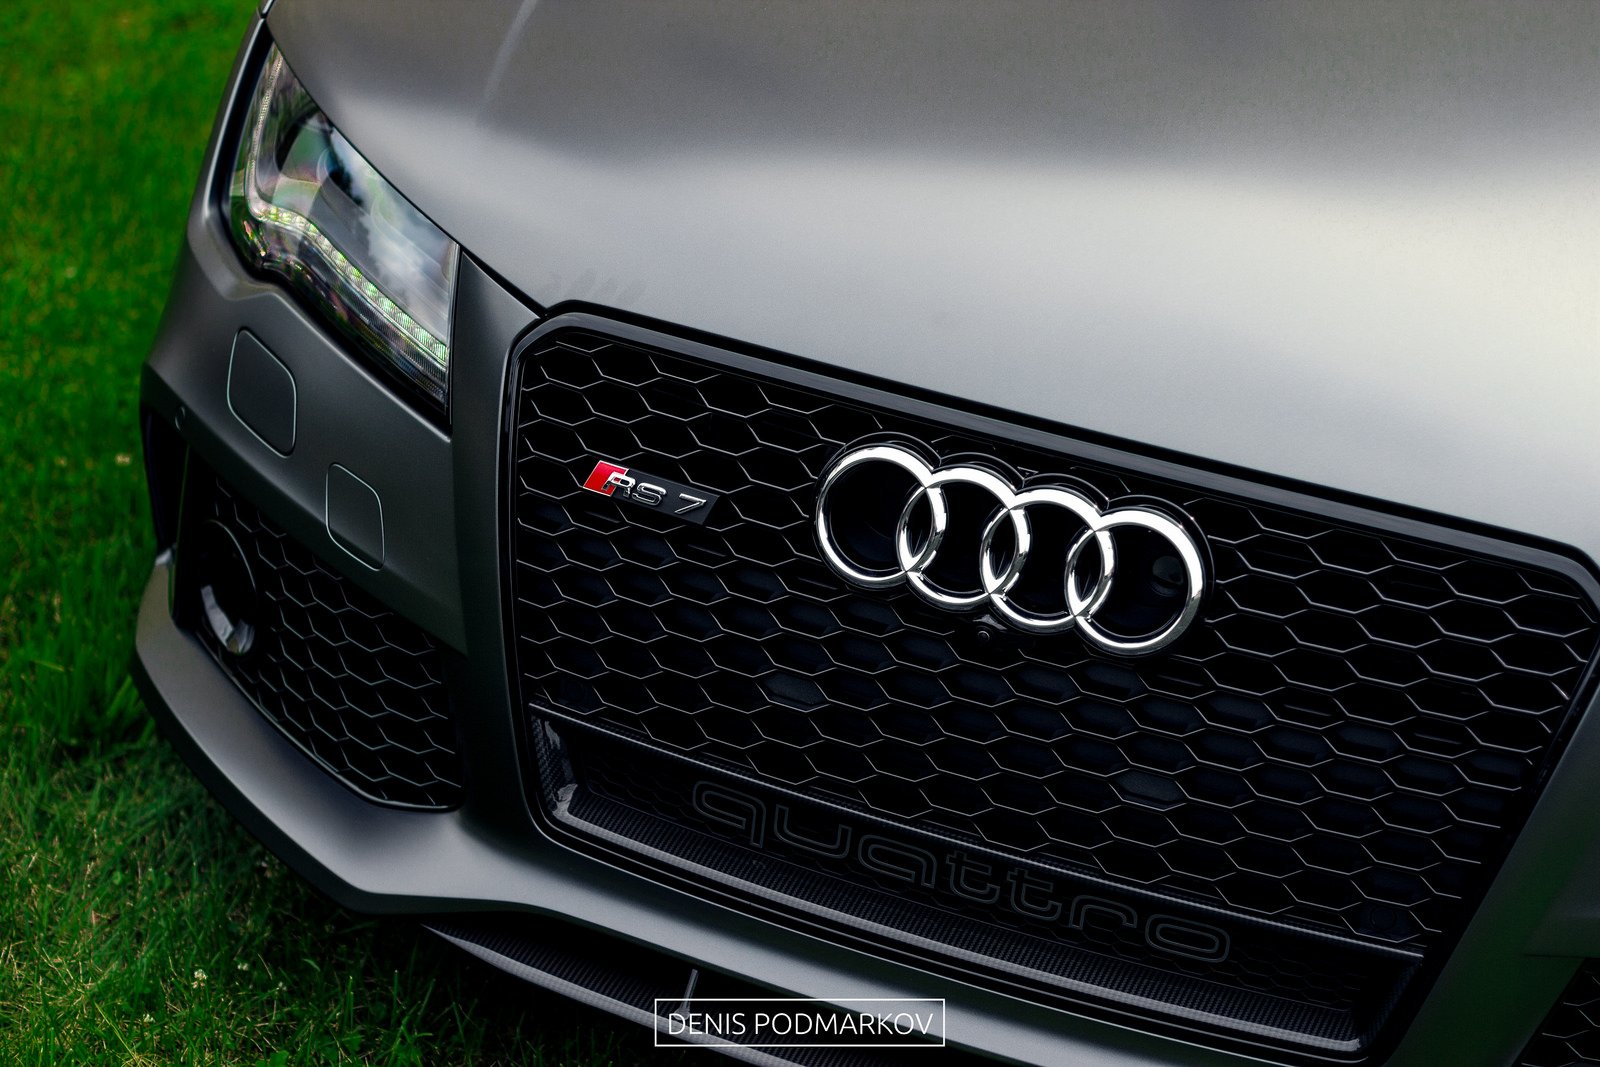 The Lowest Audi Auto Insurance Prices